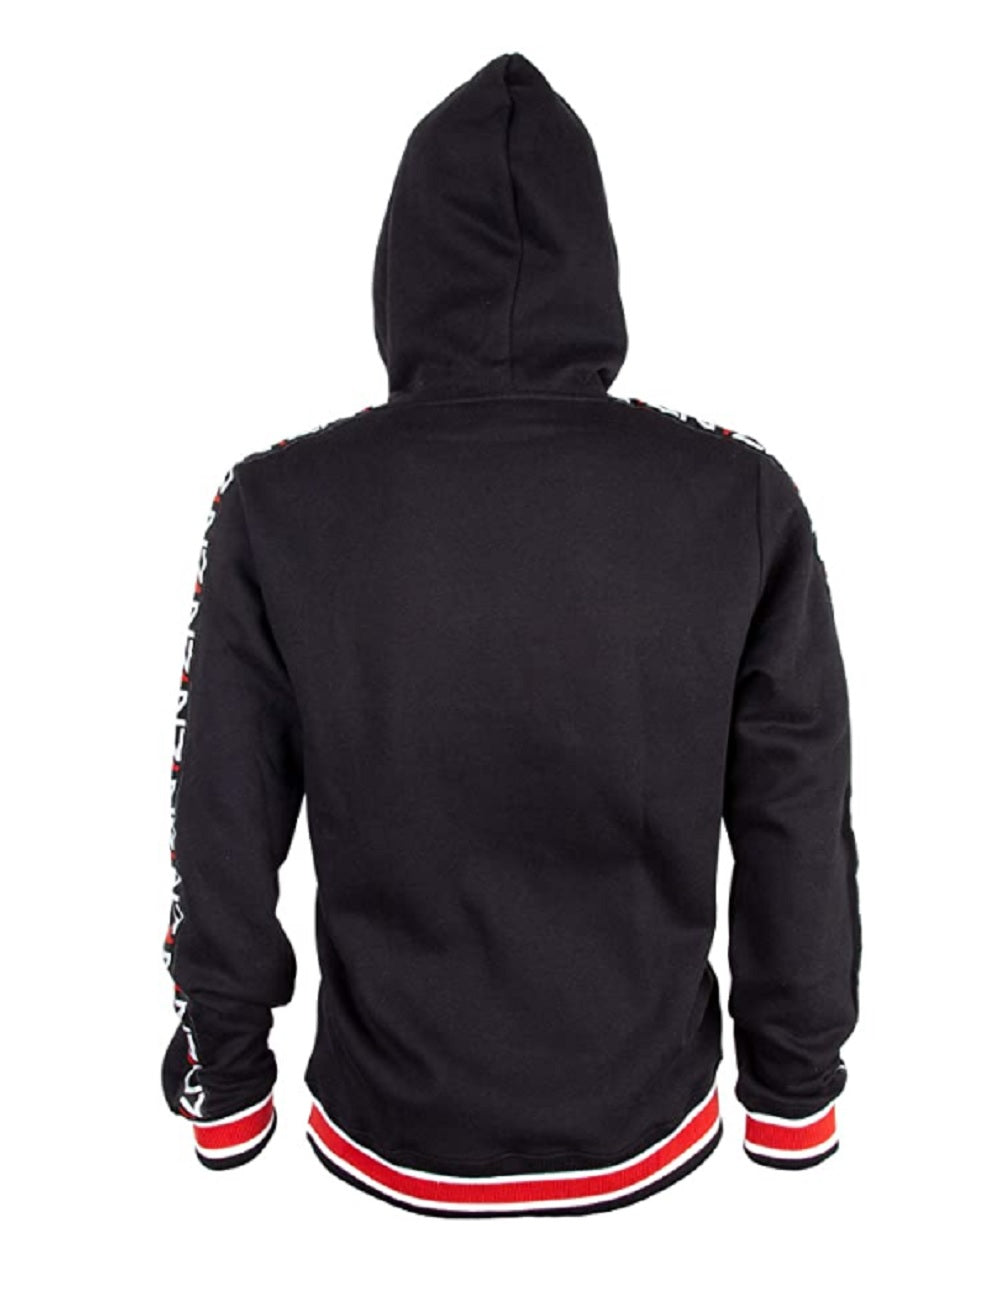 Mass Effect Space Champion Adult Pullover Hoodie